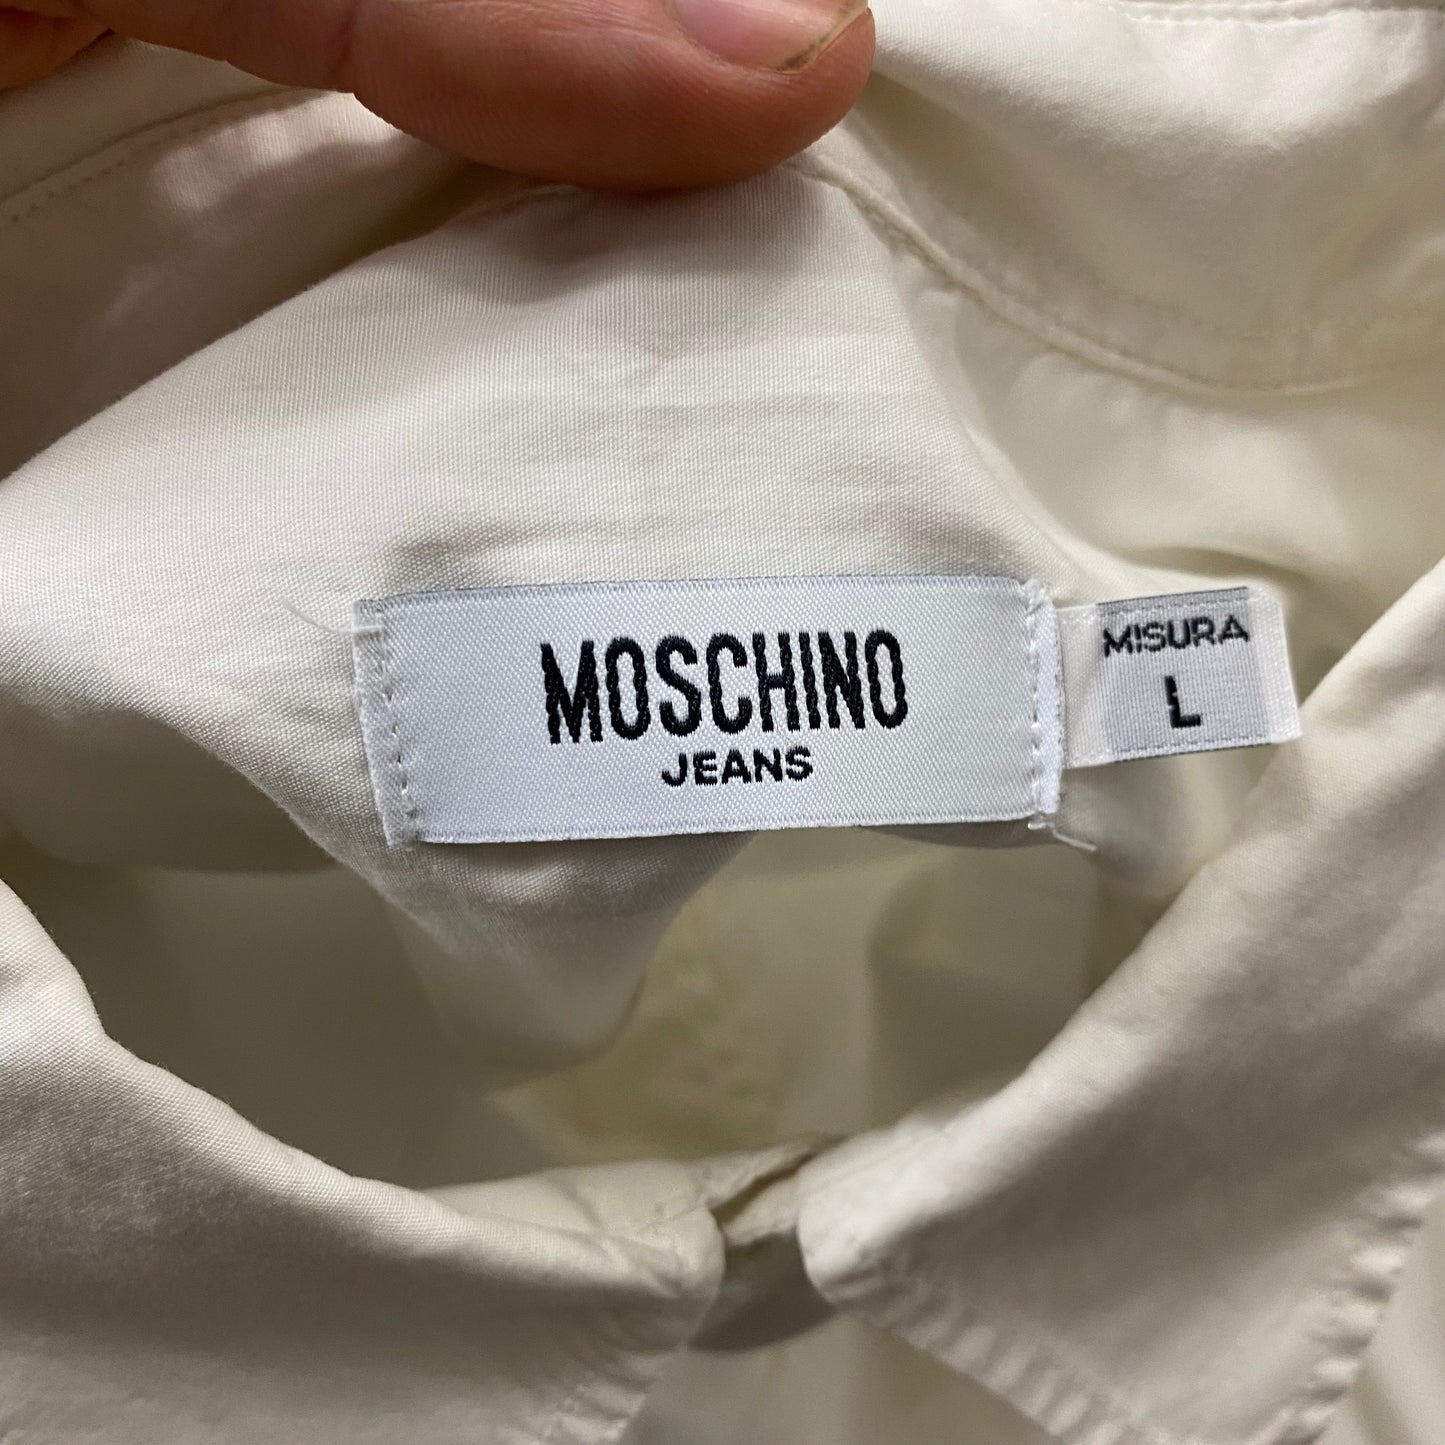 Moschino Jeans 00’s Back Graphic - L